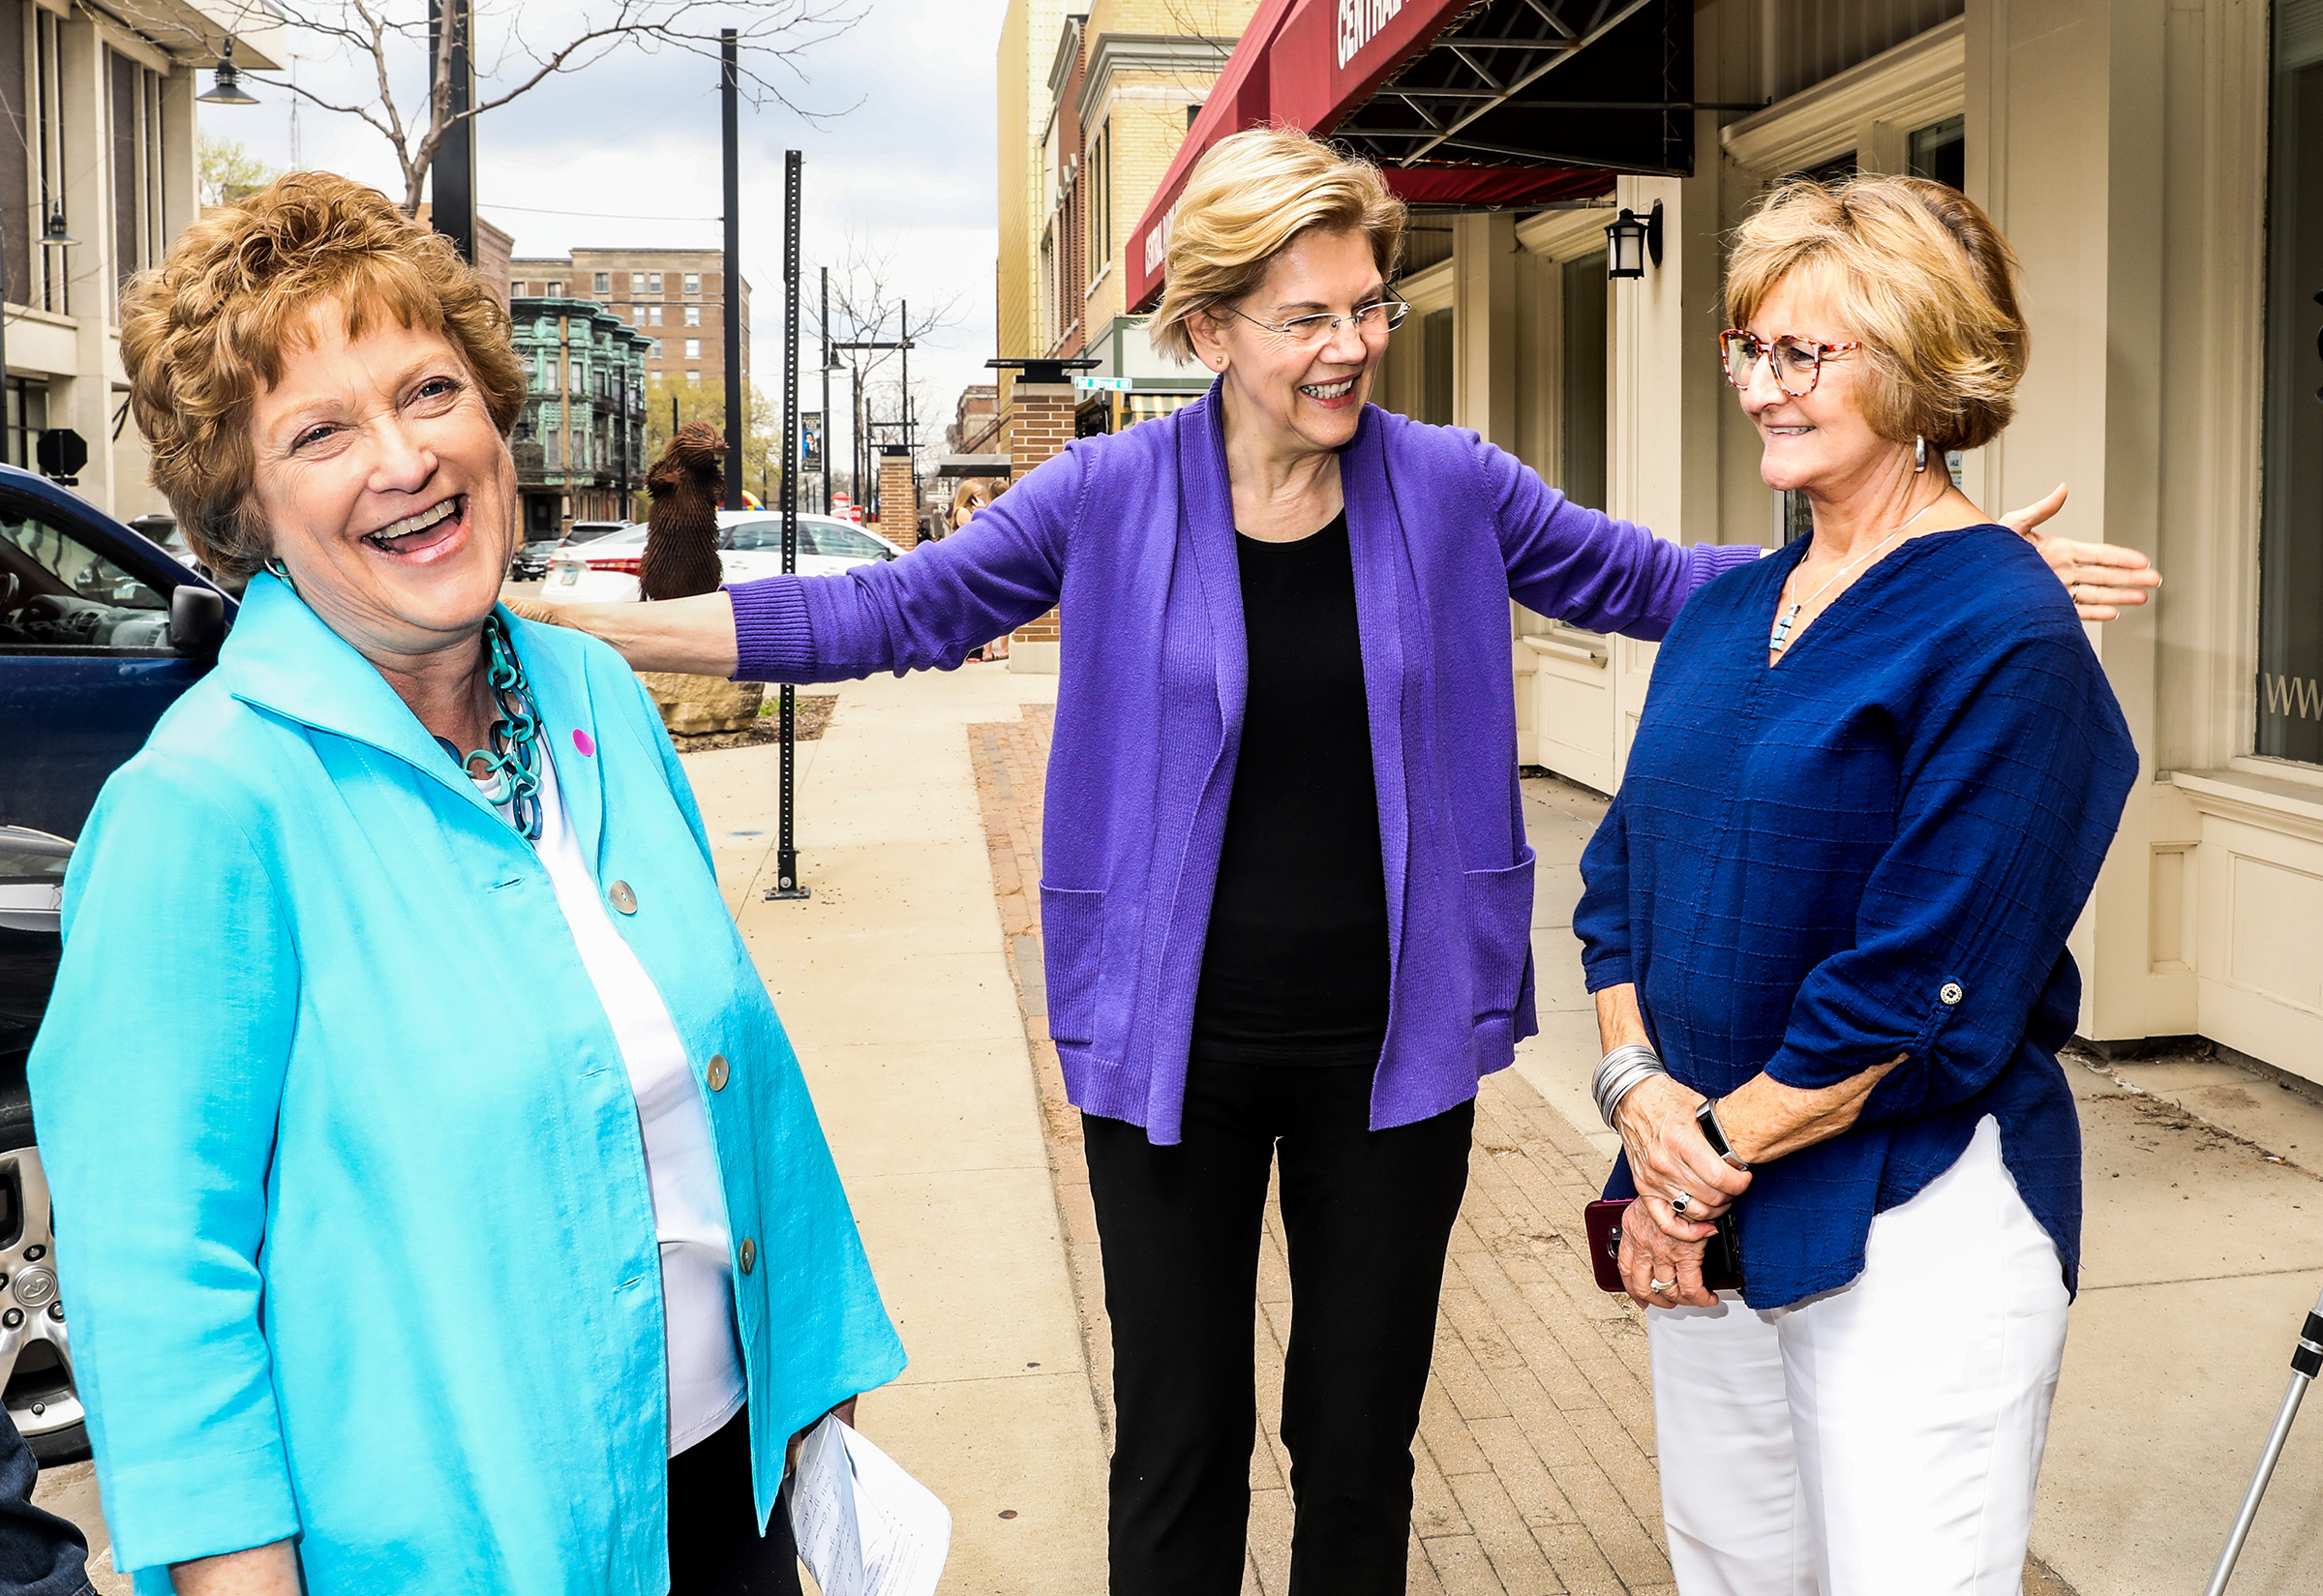 From left to right: State Senator Amanda Ragan, Warren and State Representative Sharon Steckman outside a meet and greet in Mason City, Iowa, on May 4. (Krista Schlueter for TIME)